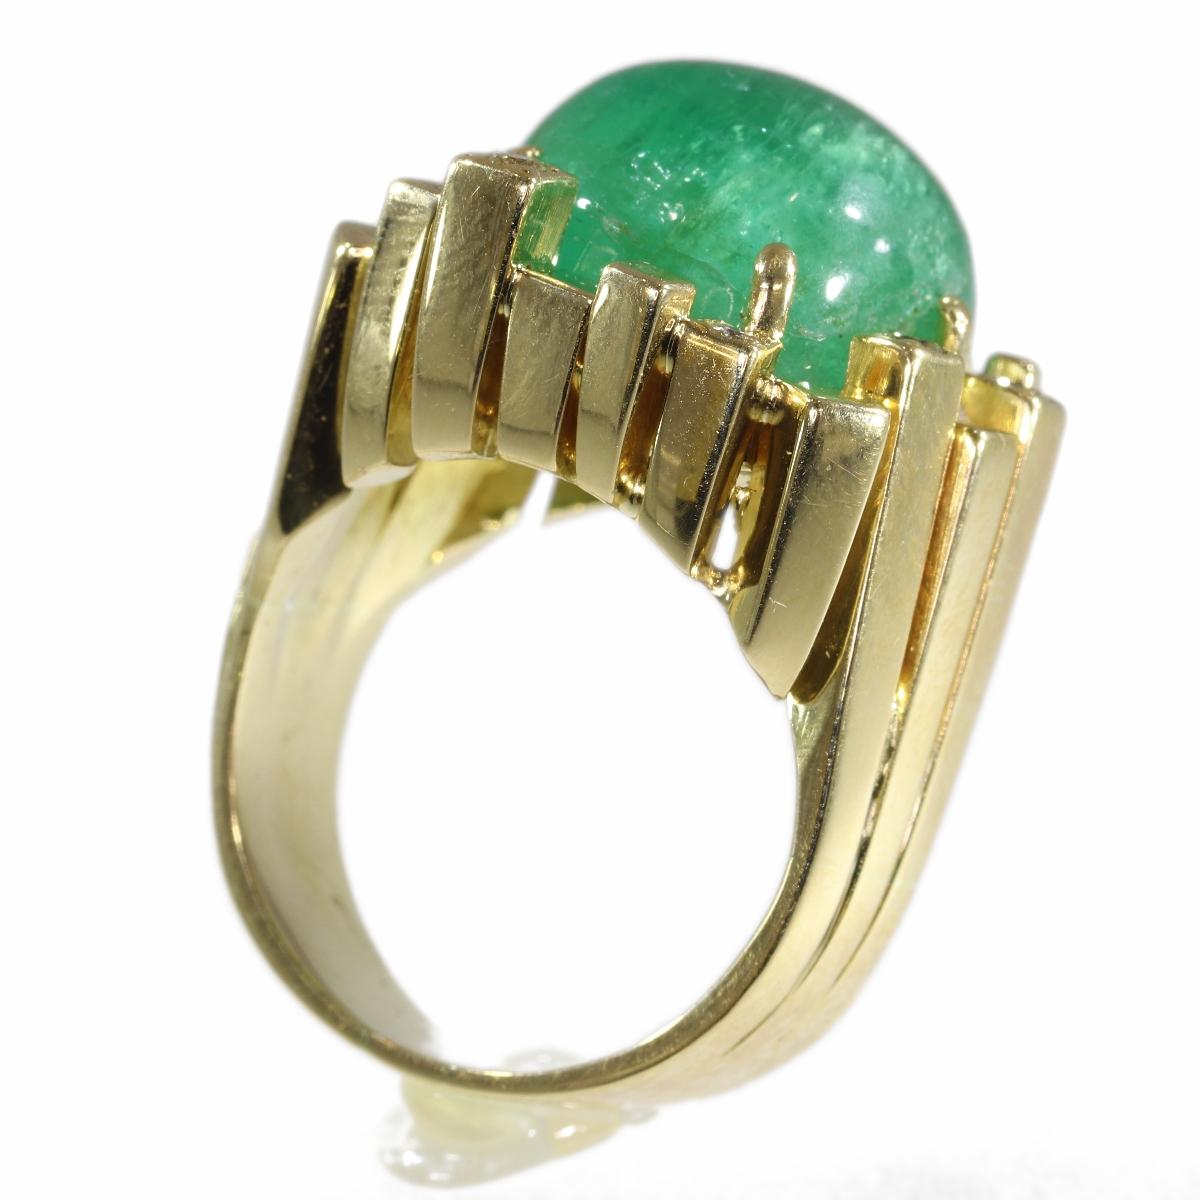 Vintage Seventies Modernistic Artist Design Ring with Large Emerald and Diamonds For Sale 3